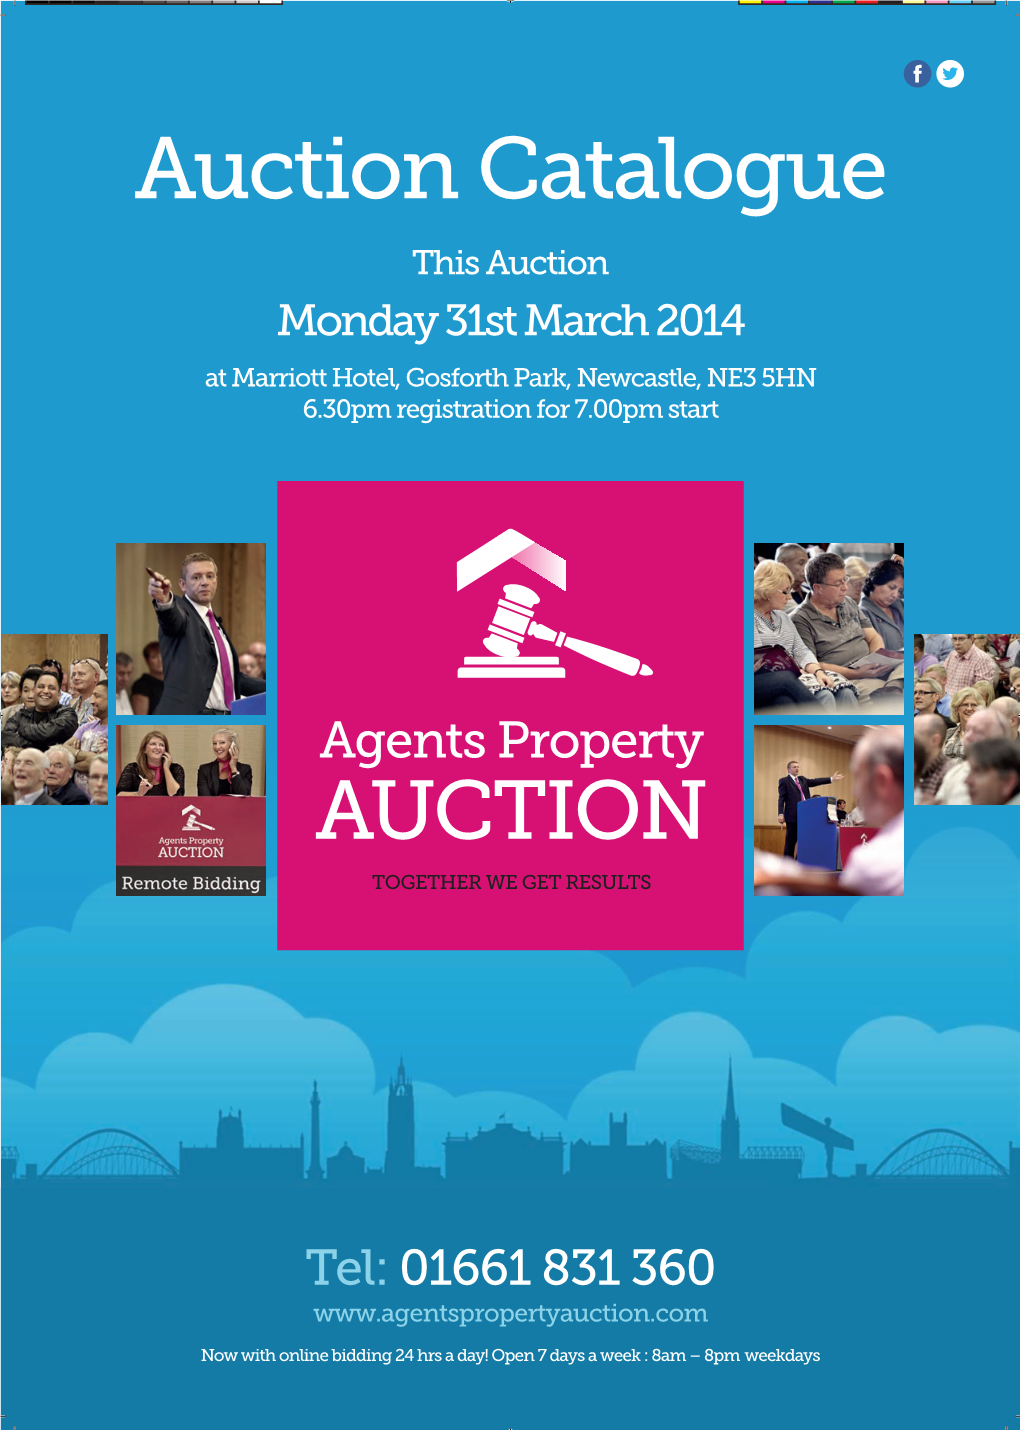 Auction Catalogue This Auction Monday 31St March 2014 at Marriott Hotel, Gosforth Park, Newcastle, NE3 5HN 6.30Pm Registration for 7.00Pm Start